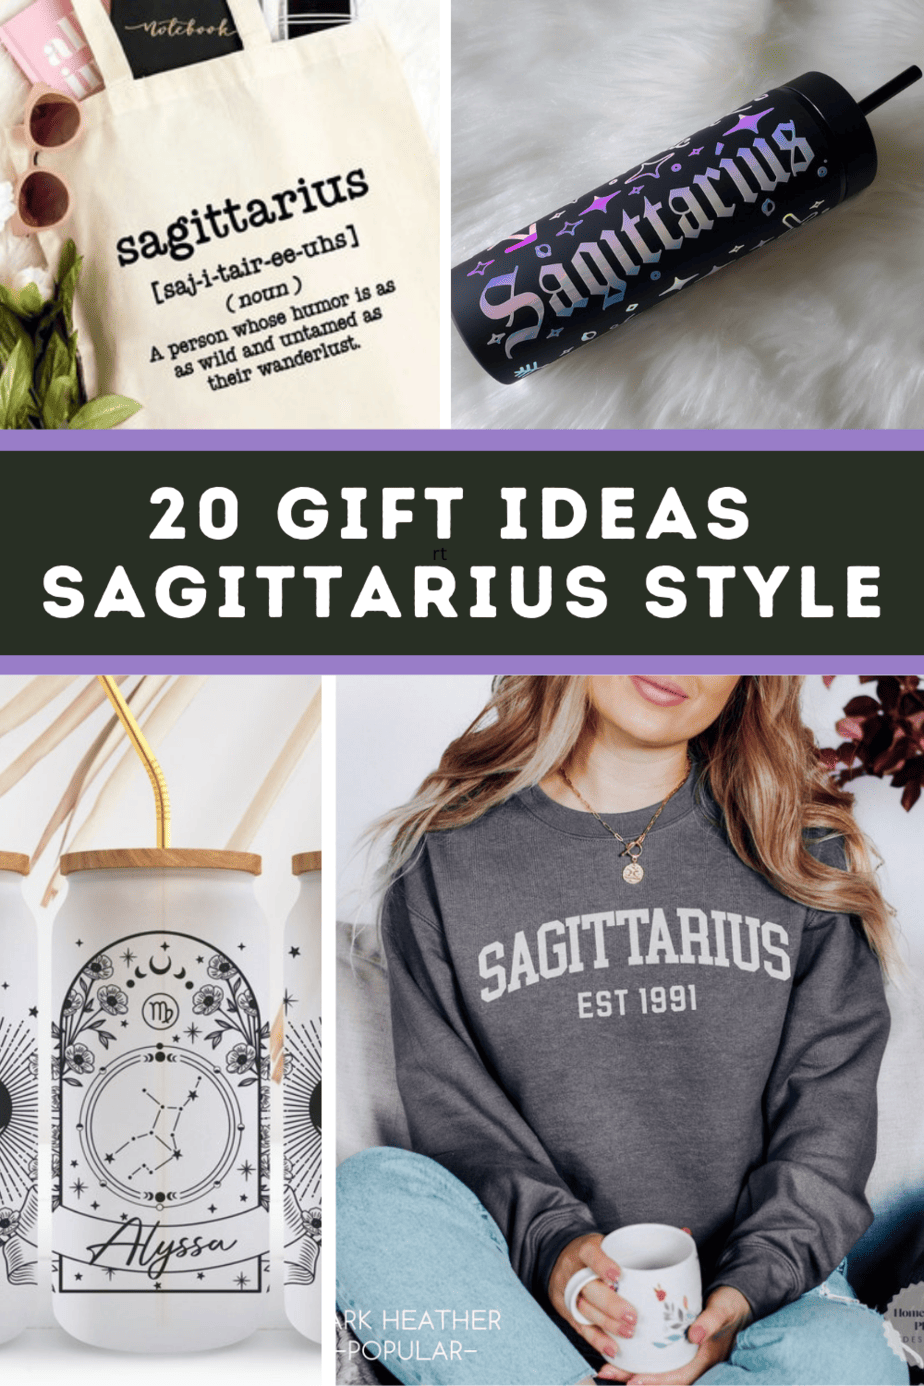 Gifts for Sagittarius Women - the Cosmic Gift Guide